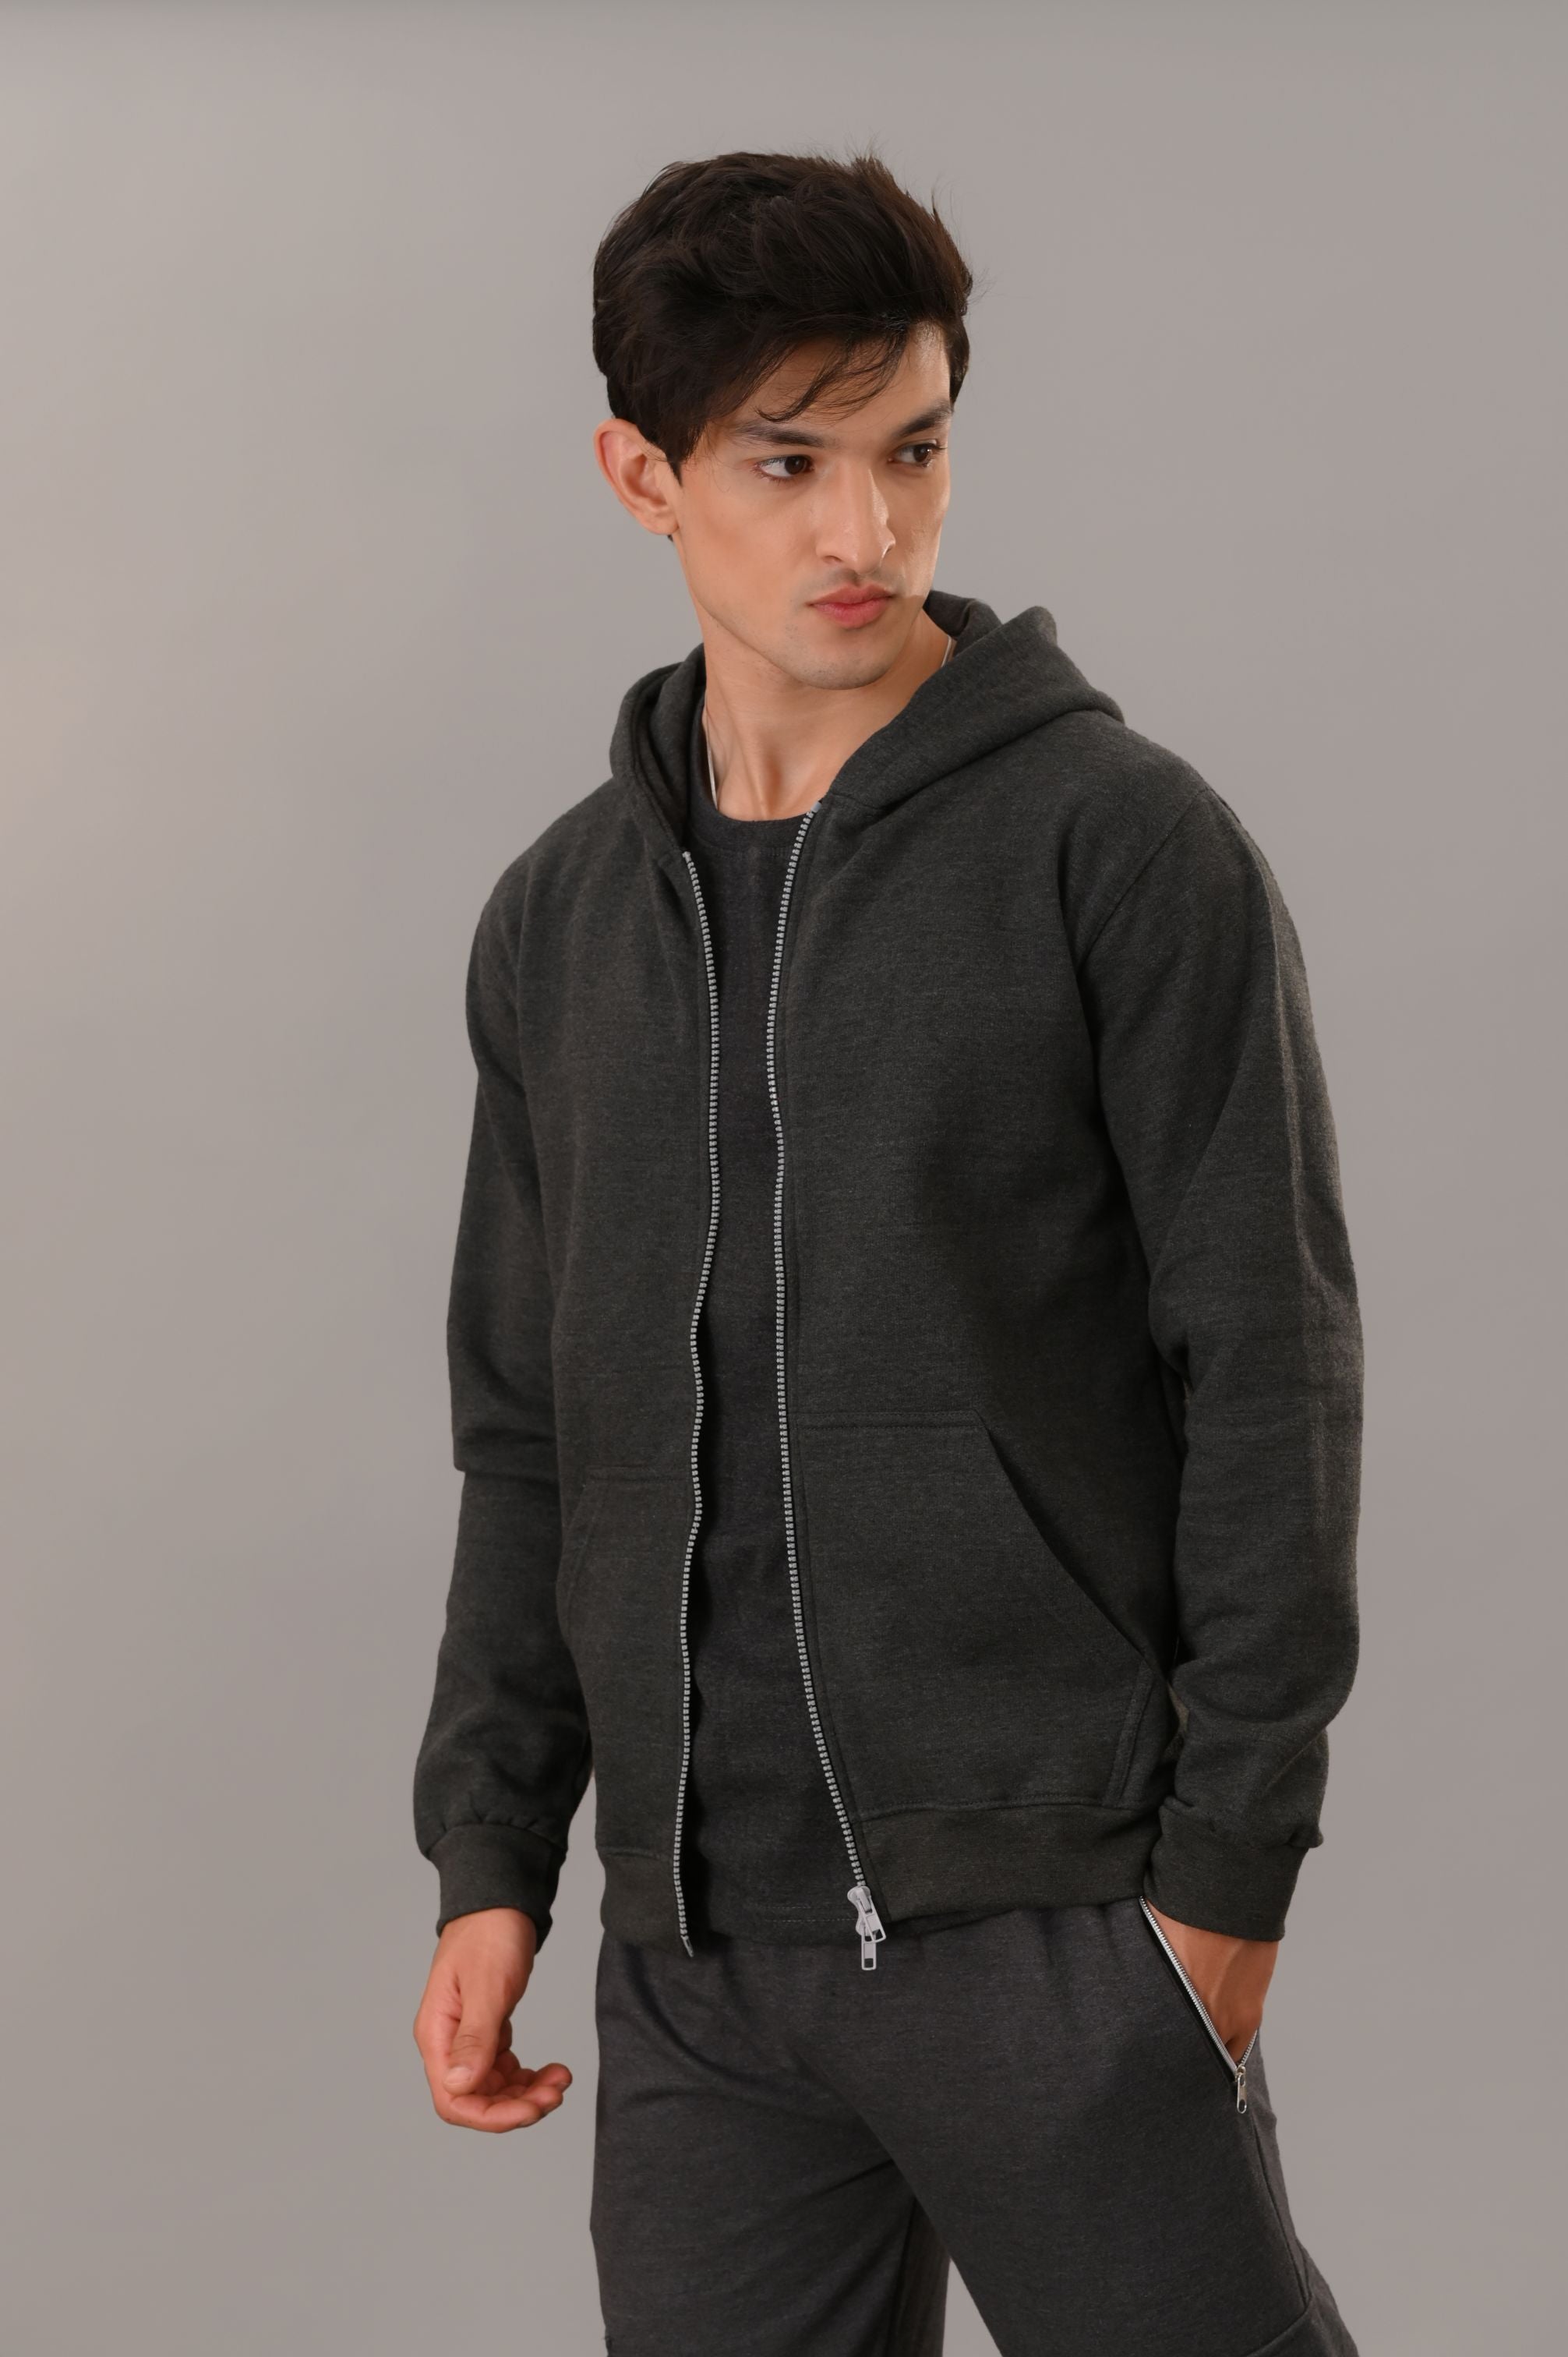 Charcoal Zipper Hoodie - M - Checkmate Atelier - Official Online Store